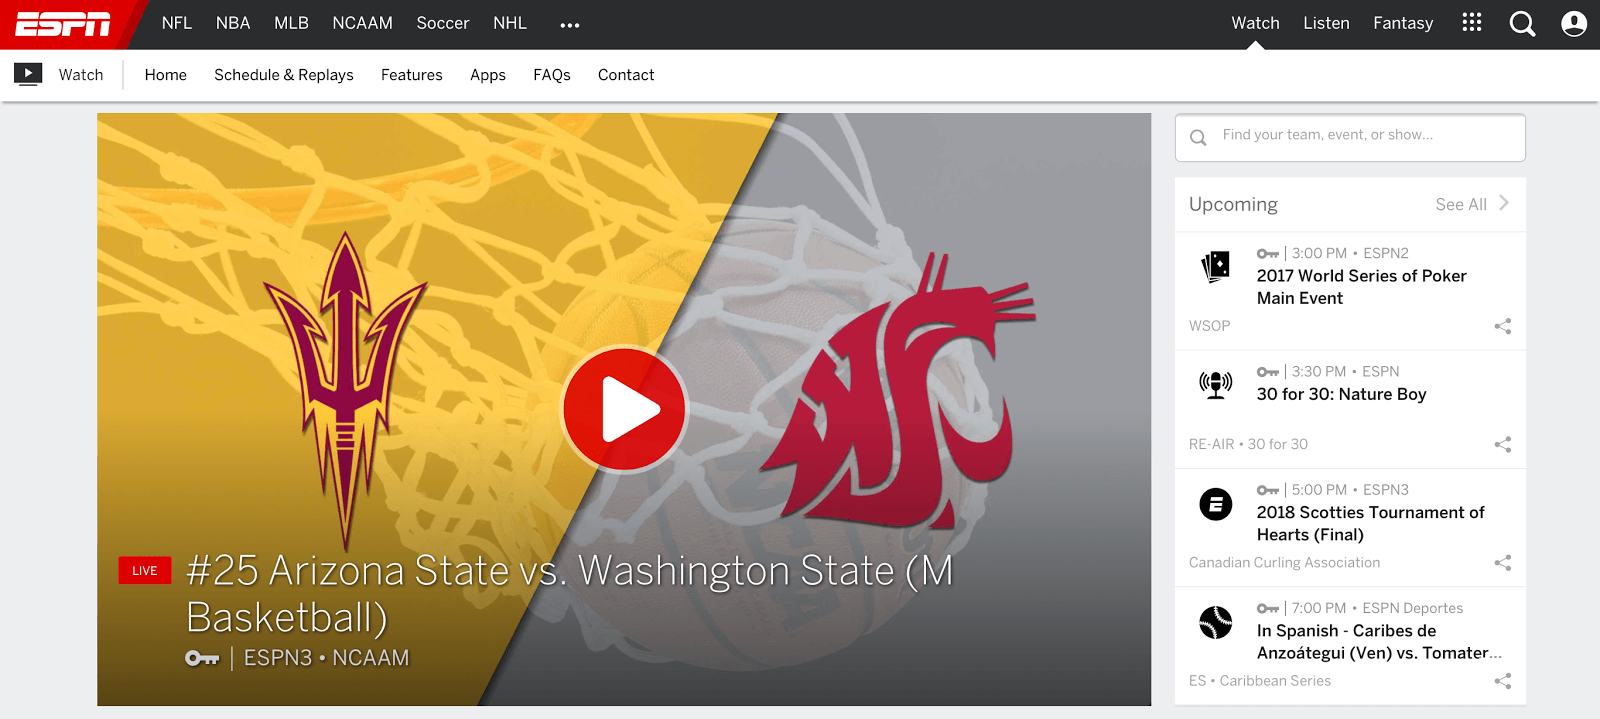 WatchESPN Logo - How to Watch ESPN3 Without Cable